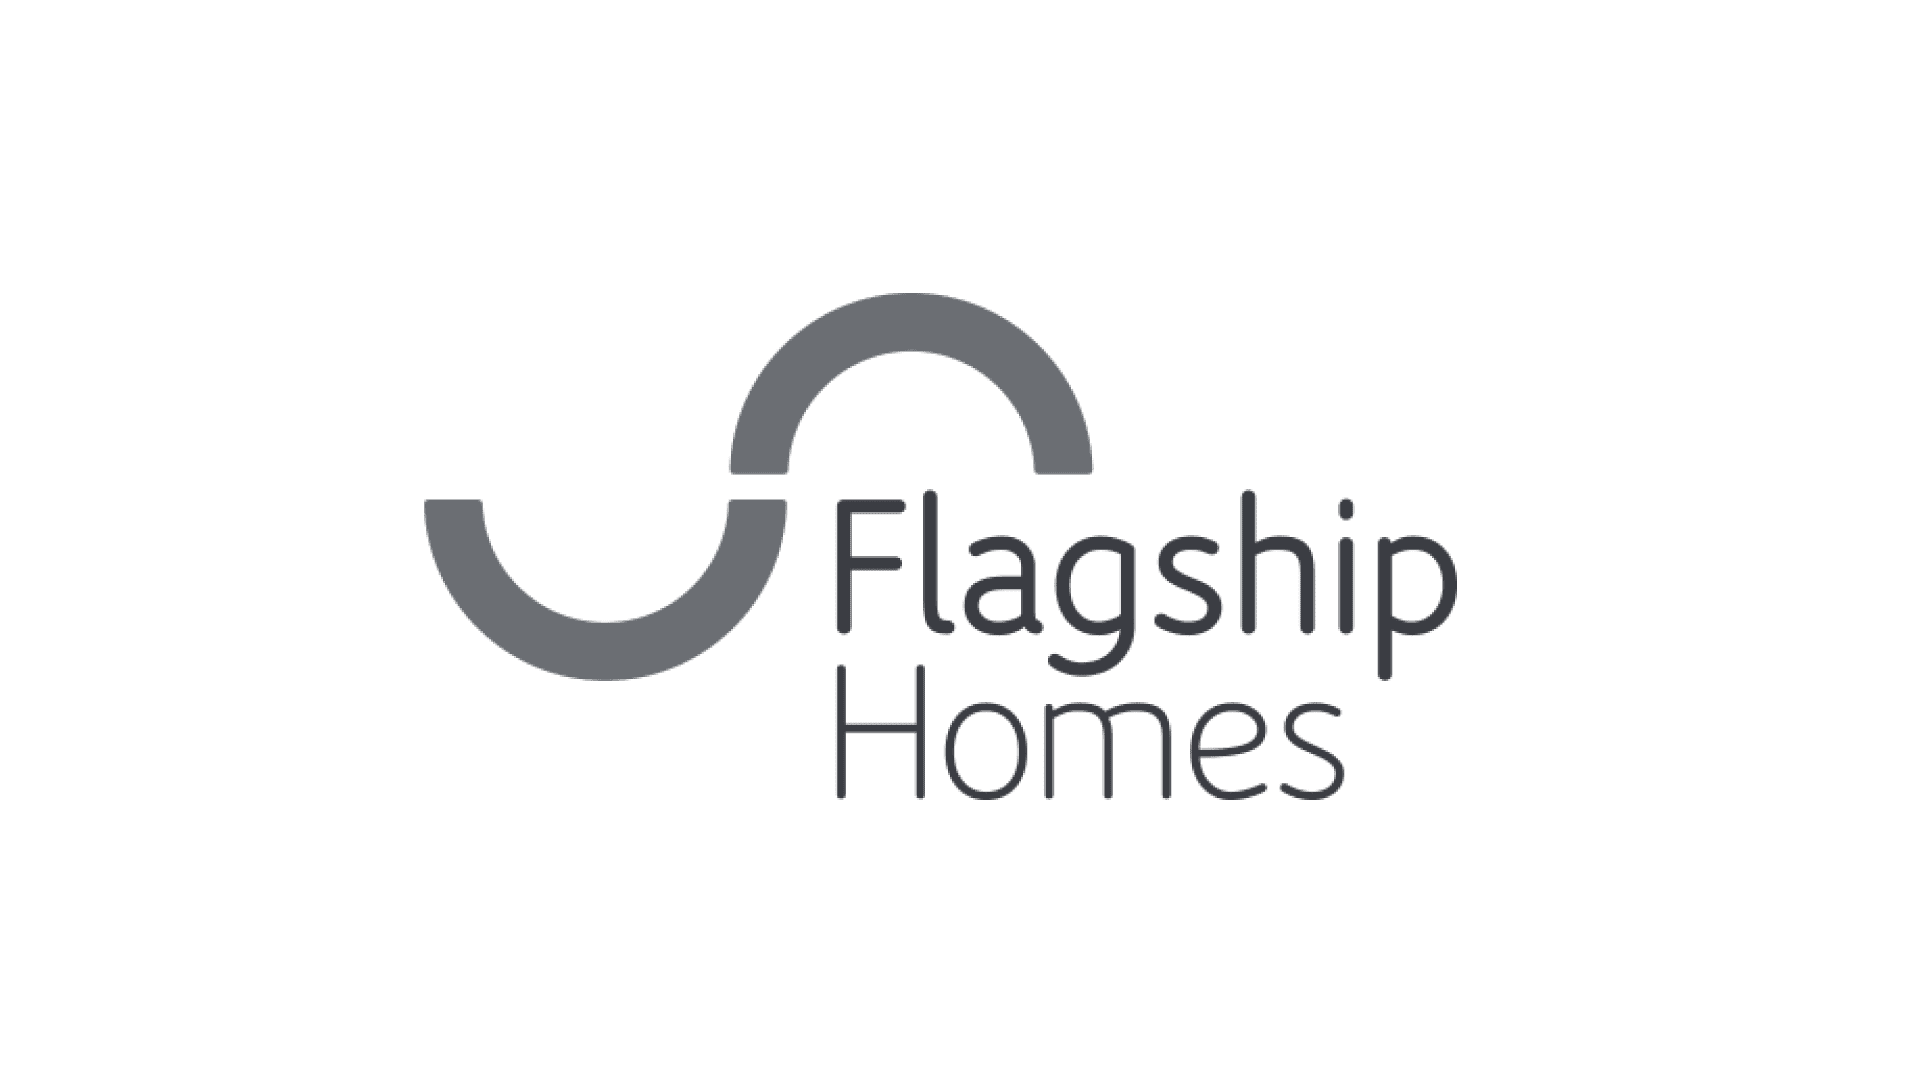 Flagship Homes works with CADS